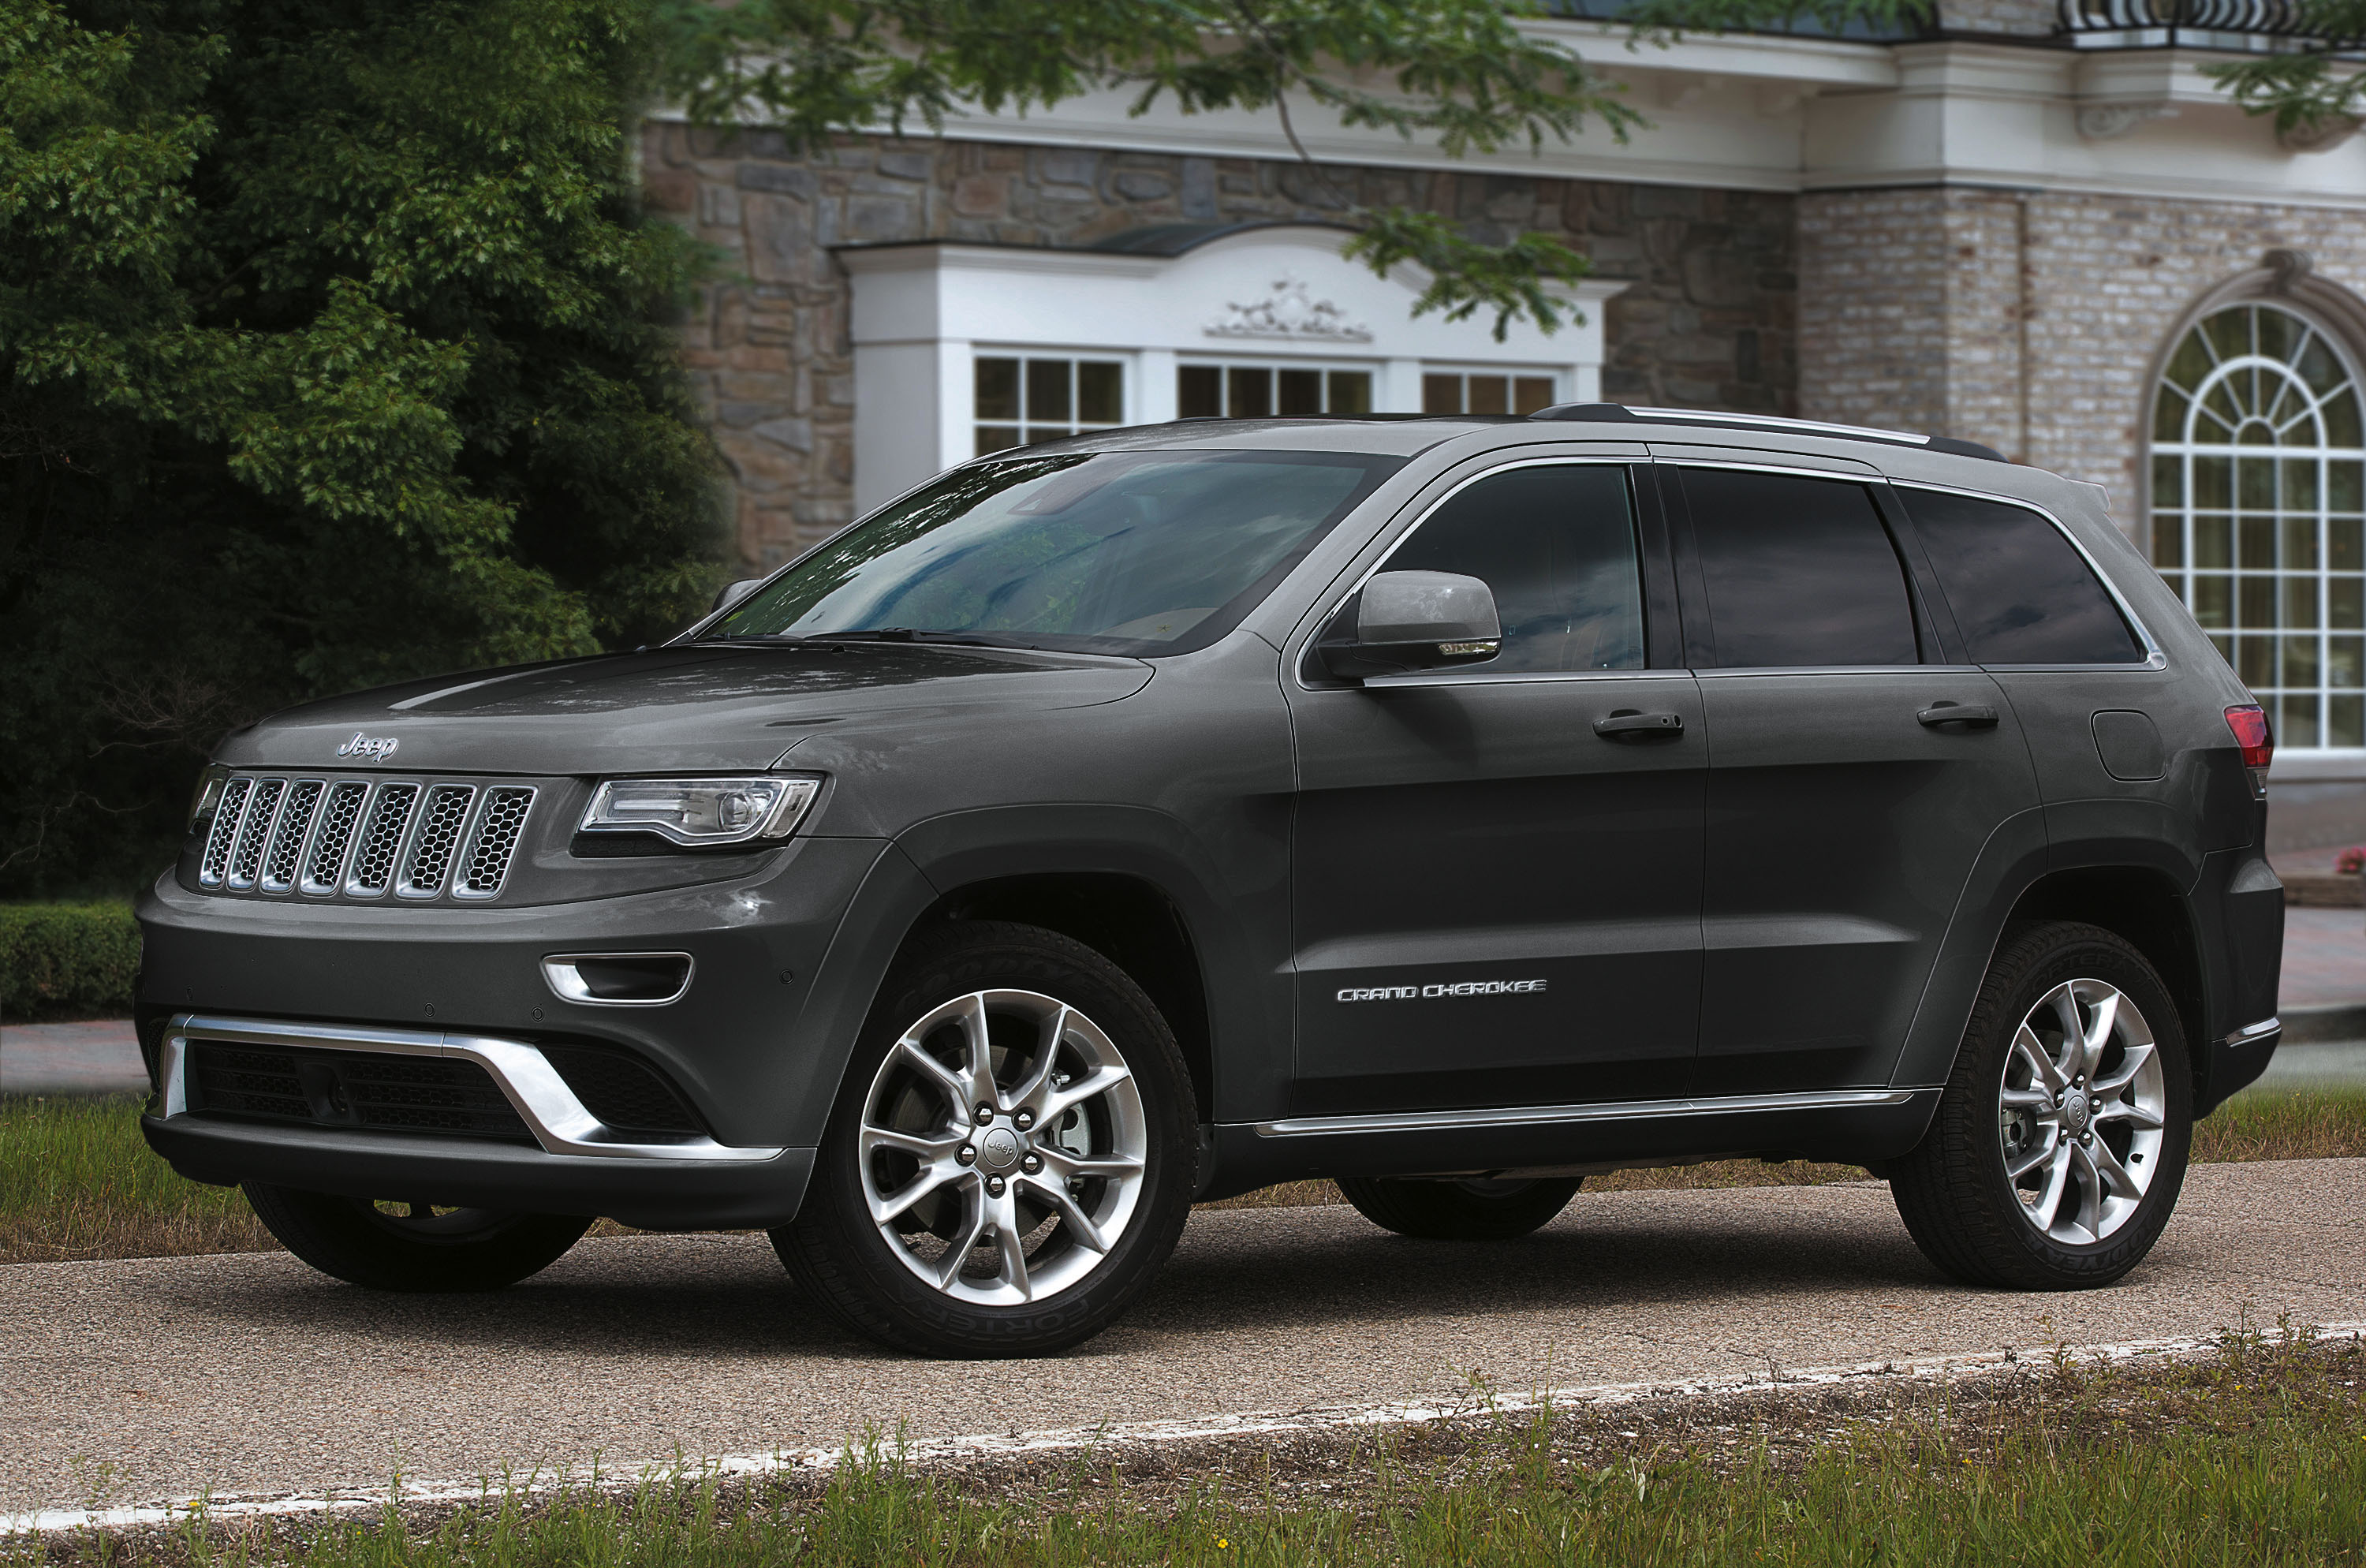 2017 Jeep Cherokee Prices Announced Revie